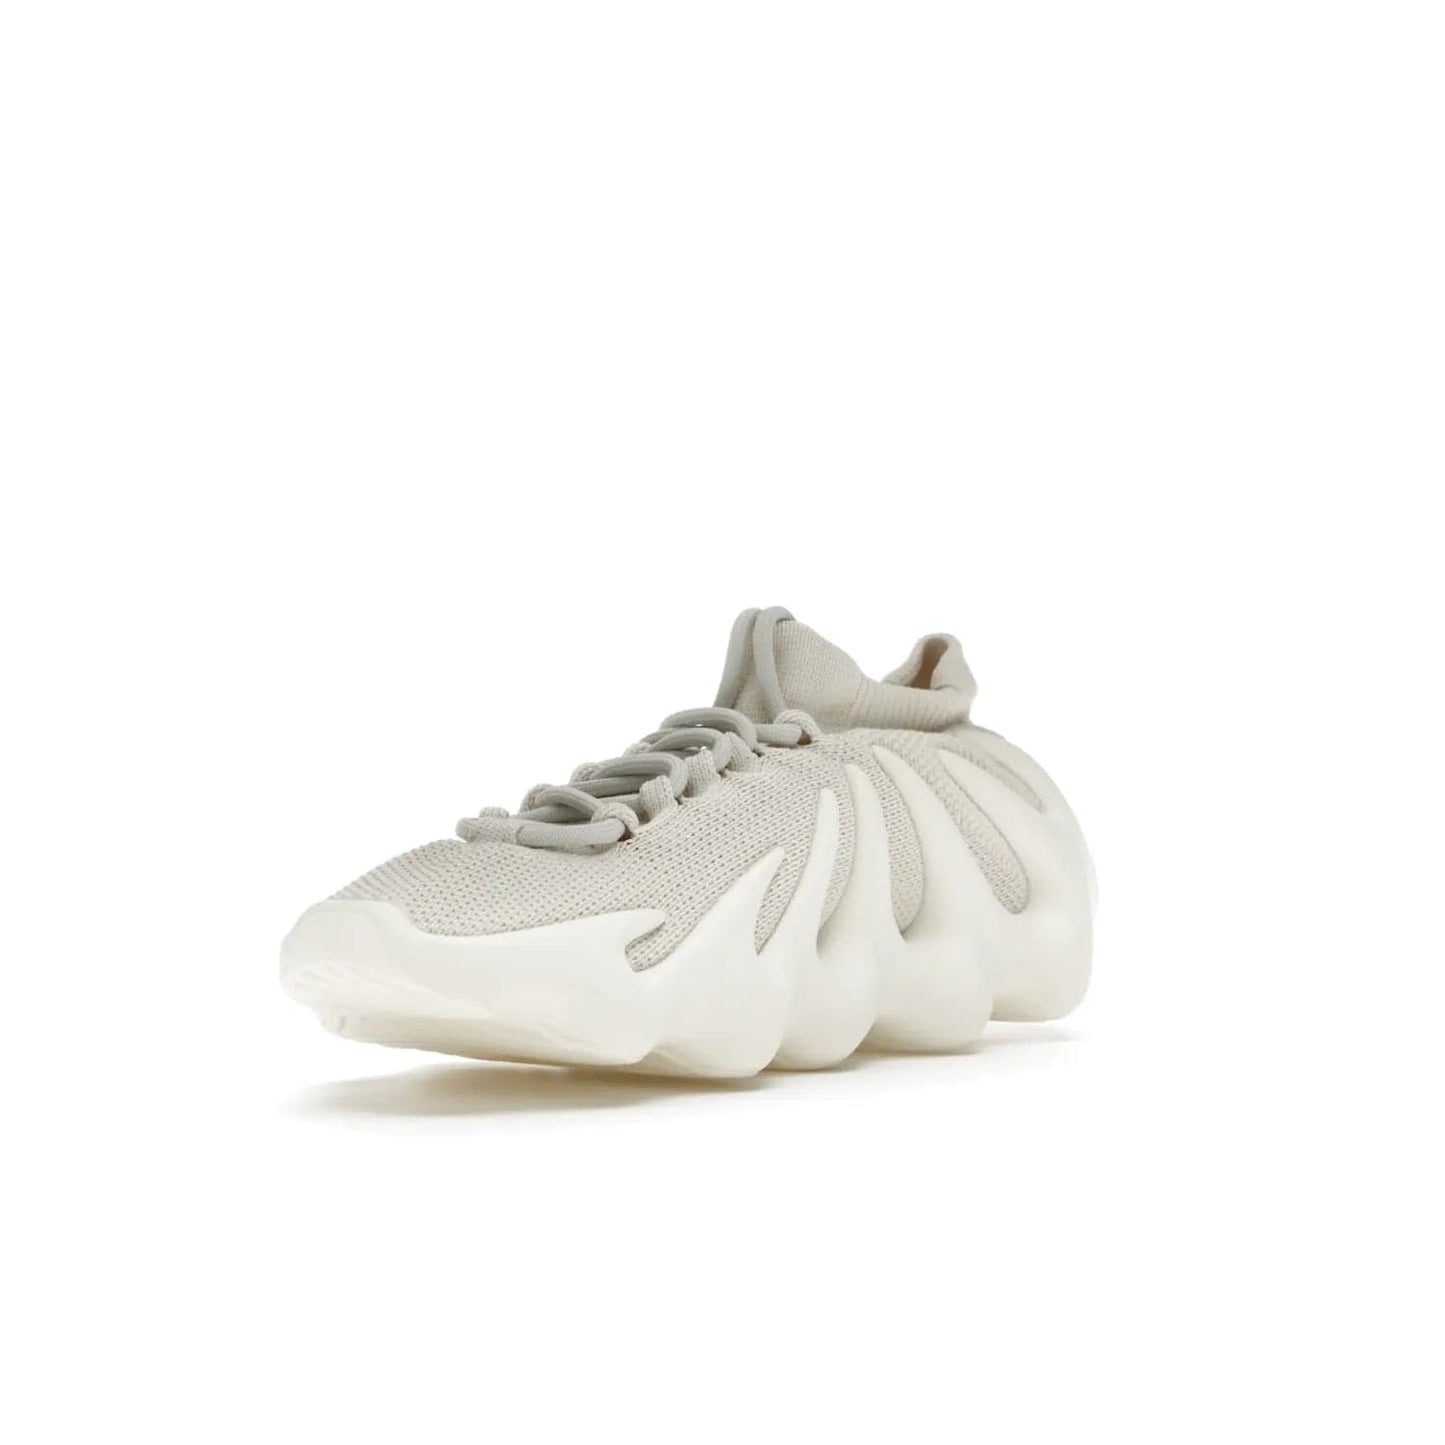 adidas Yeezy 450 Cloud White - Image 14 - Only at www.BallersClubKickz.com - Experience the future with the adidas Yeezy 450 Cloud White. A two-piece design featuring an extreme foam sole and mesh upper, this silhouette is expected to release in March 2021. Get your hands on this striking Cloud White/Cloud White colorway and stand out in the crowd.